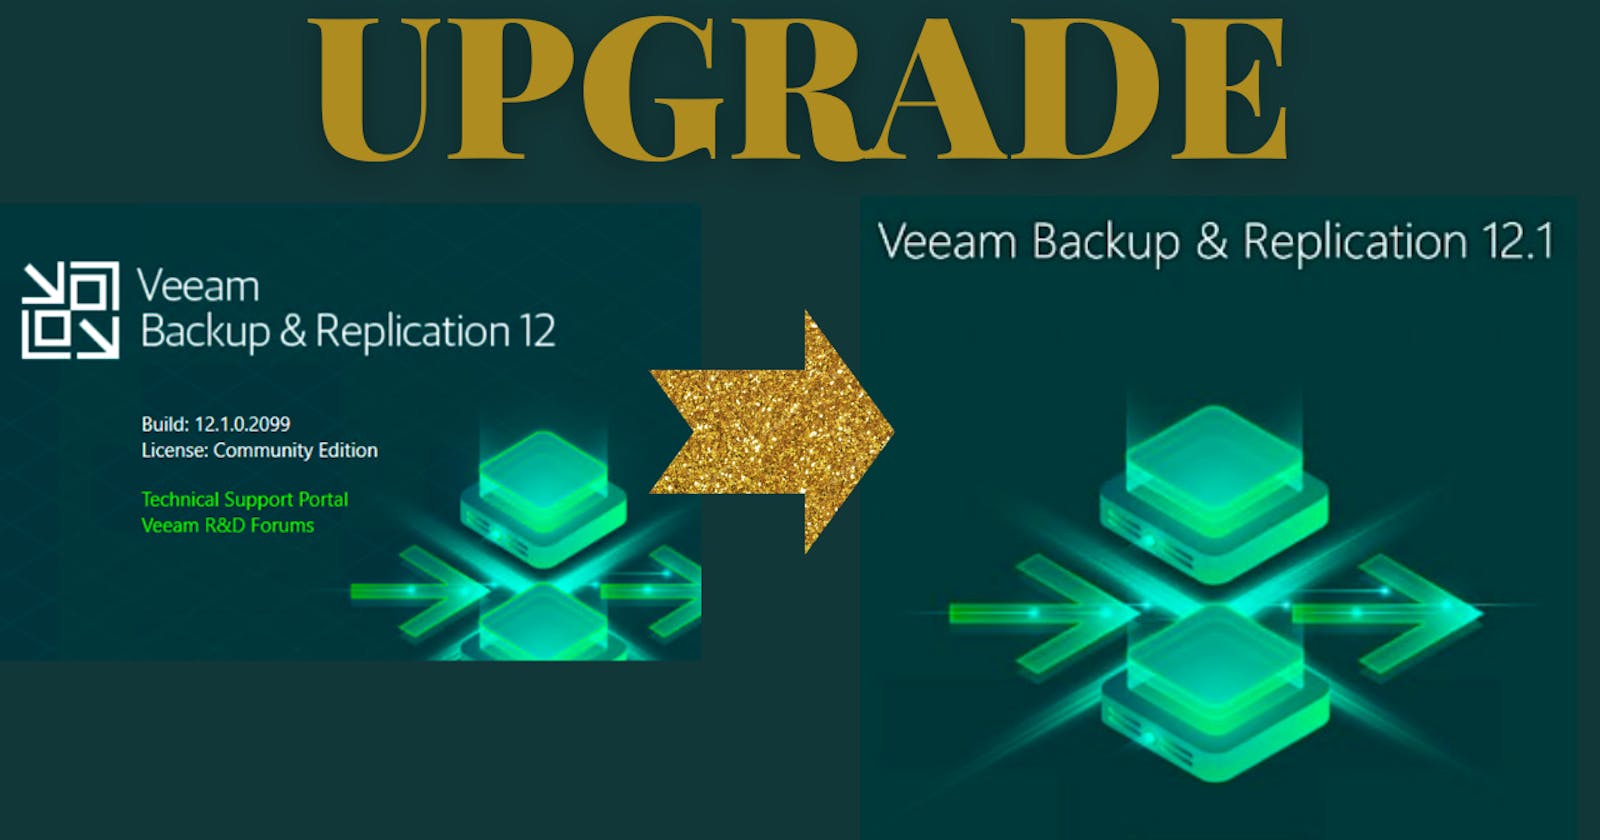 Easily Upgrade Veeam Backup and Replication from 12.0 to 12.1